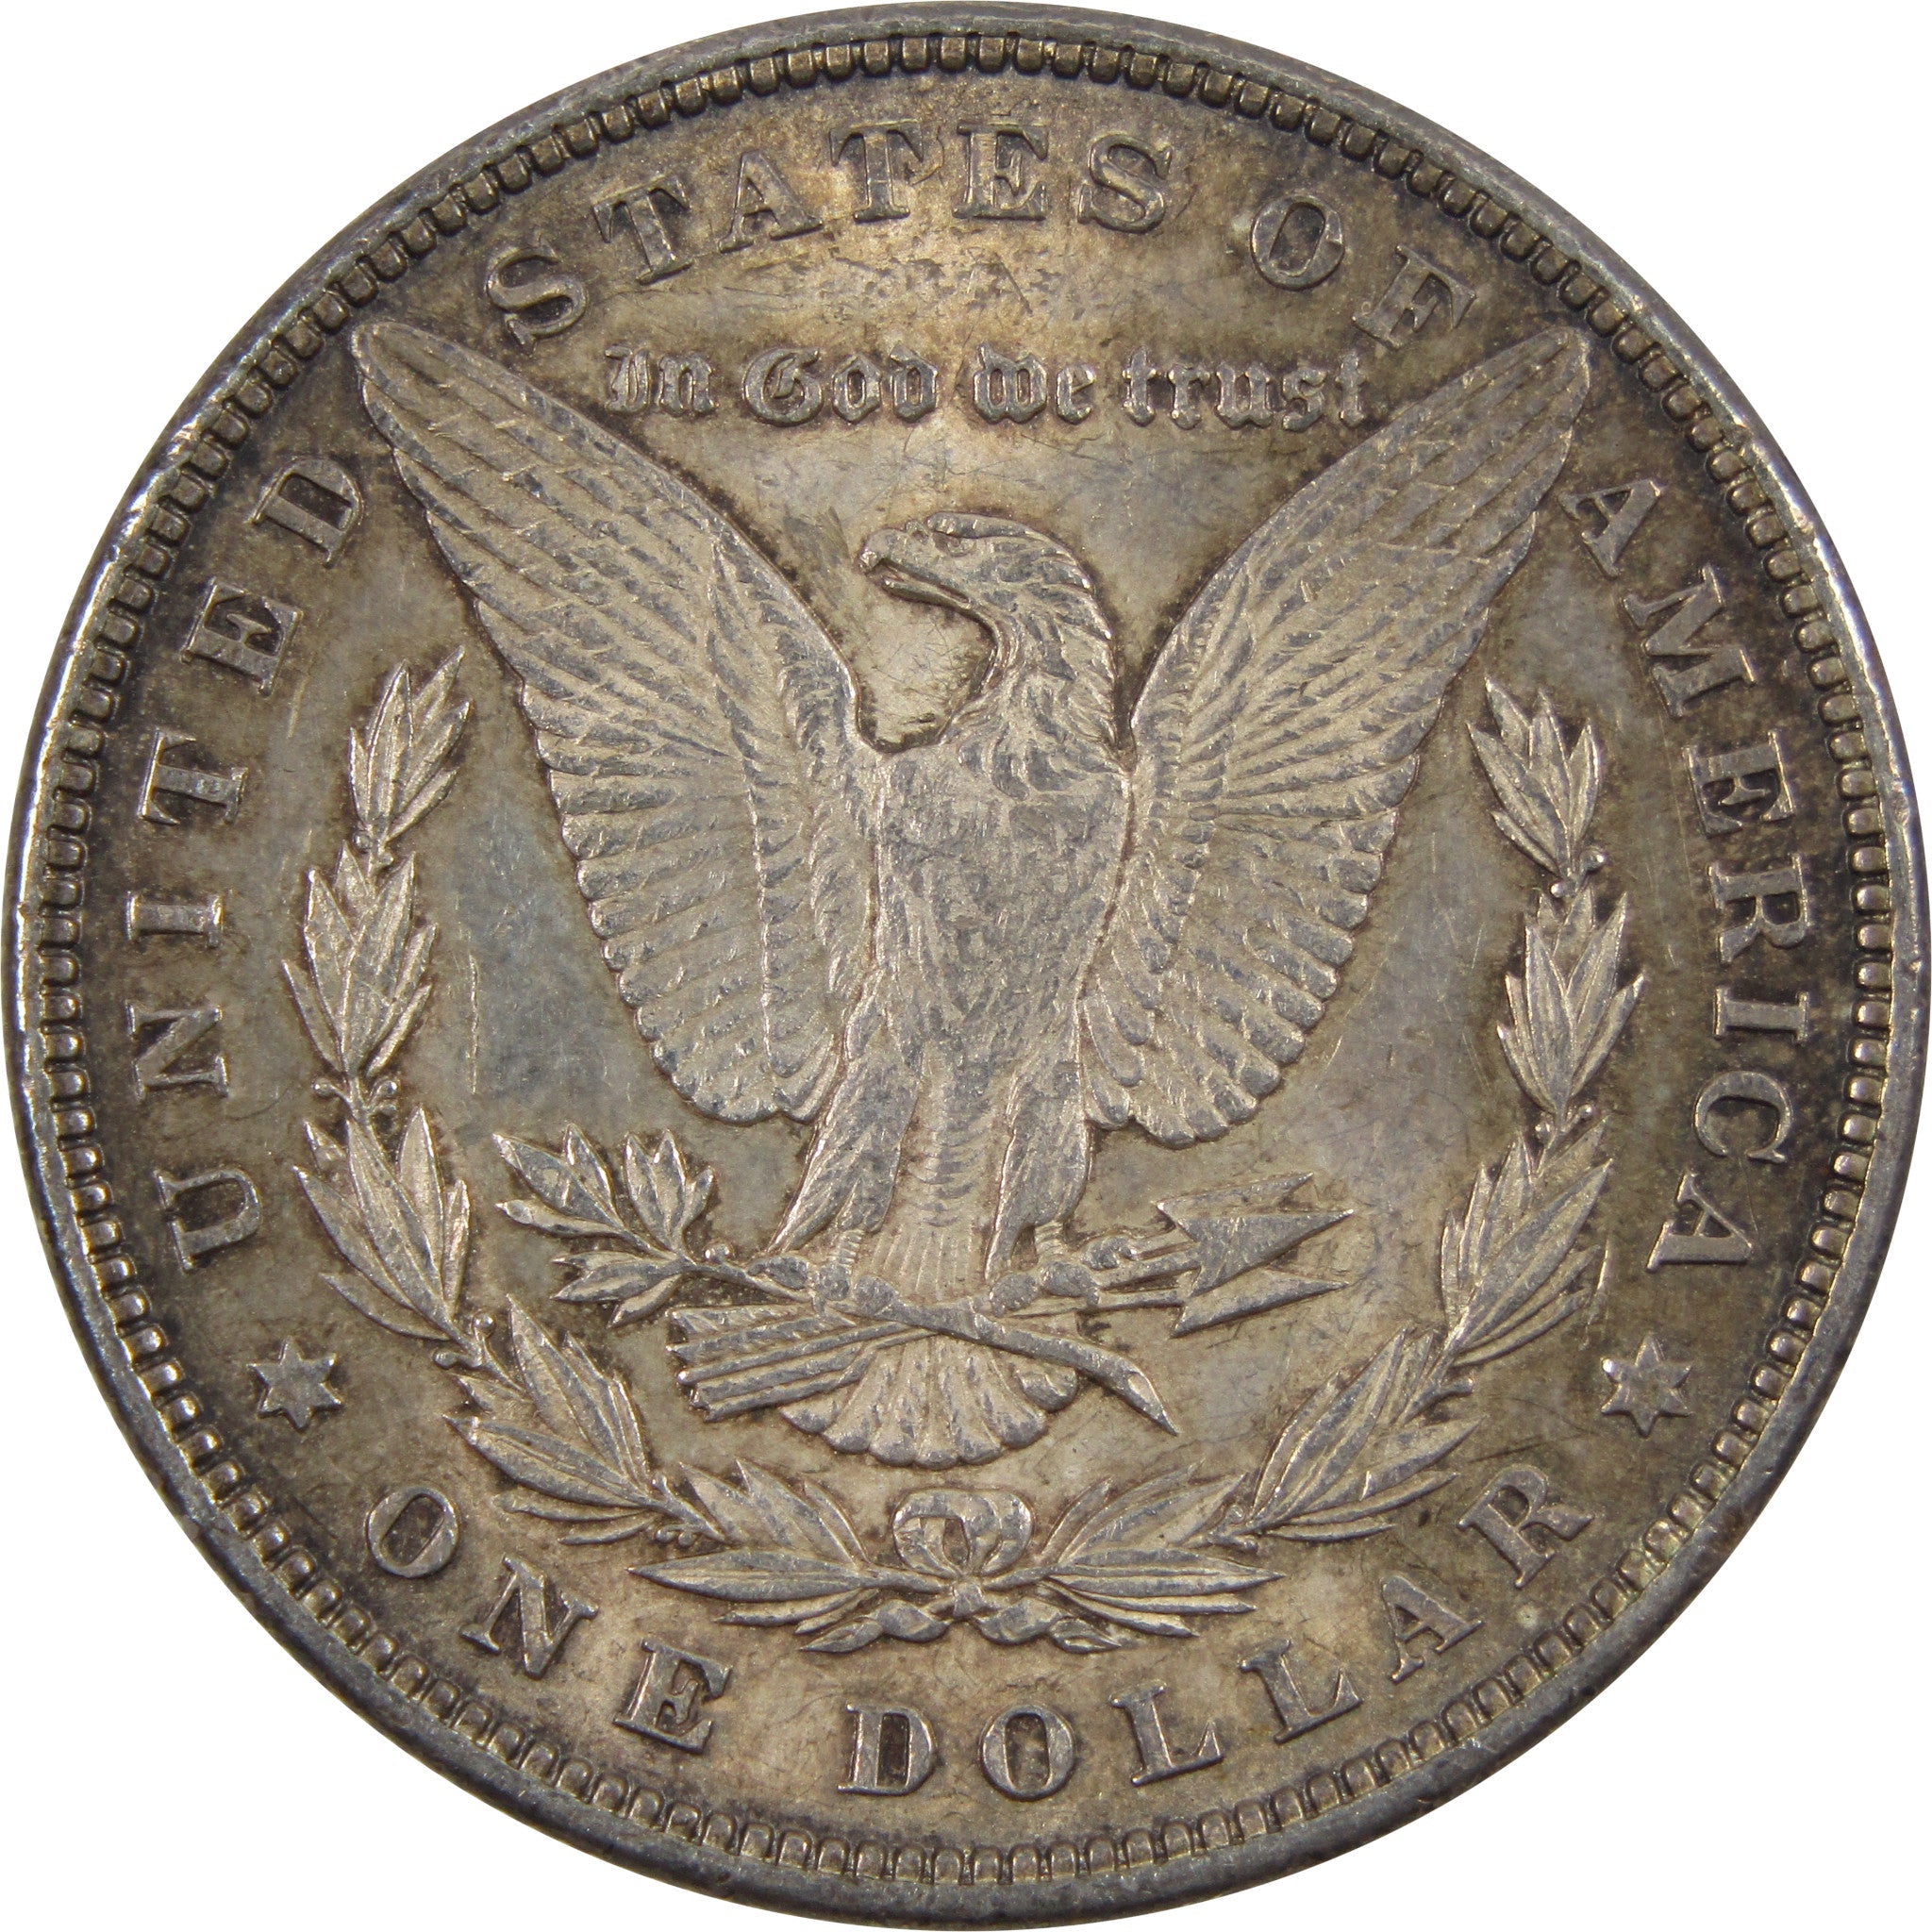 1883 Morgan Dollar AU About Uncirculated 90% Silver $1 Coin SKU:I5508 - Morgan coin - Morgan silver dollar - Morgan silver dollar for sale - Profile Coins &amp; Collectibles